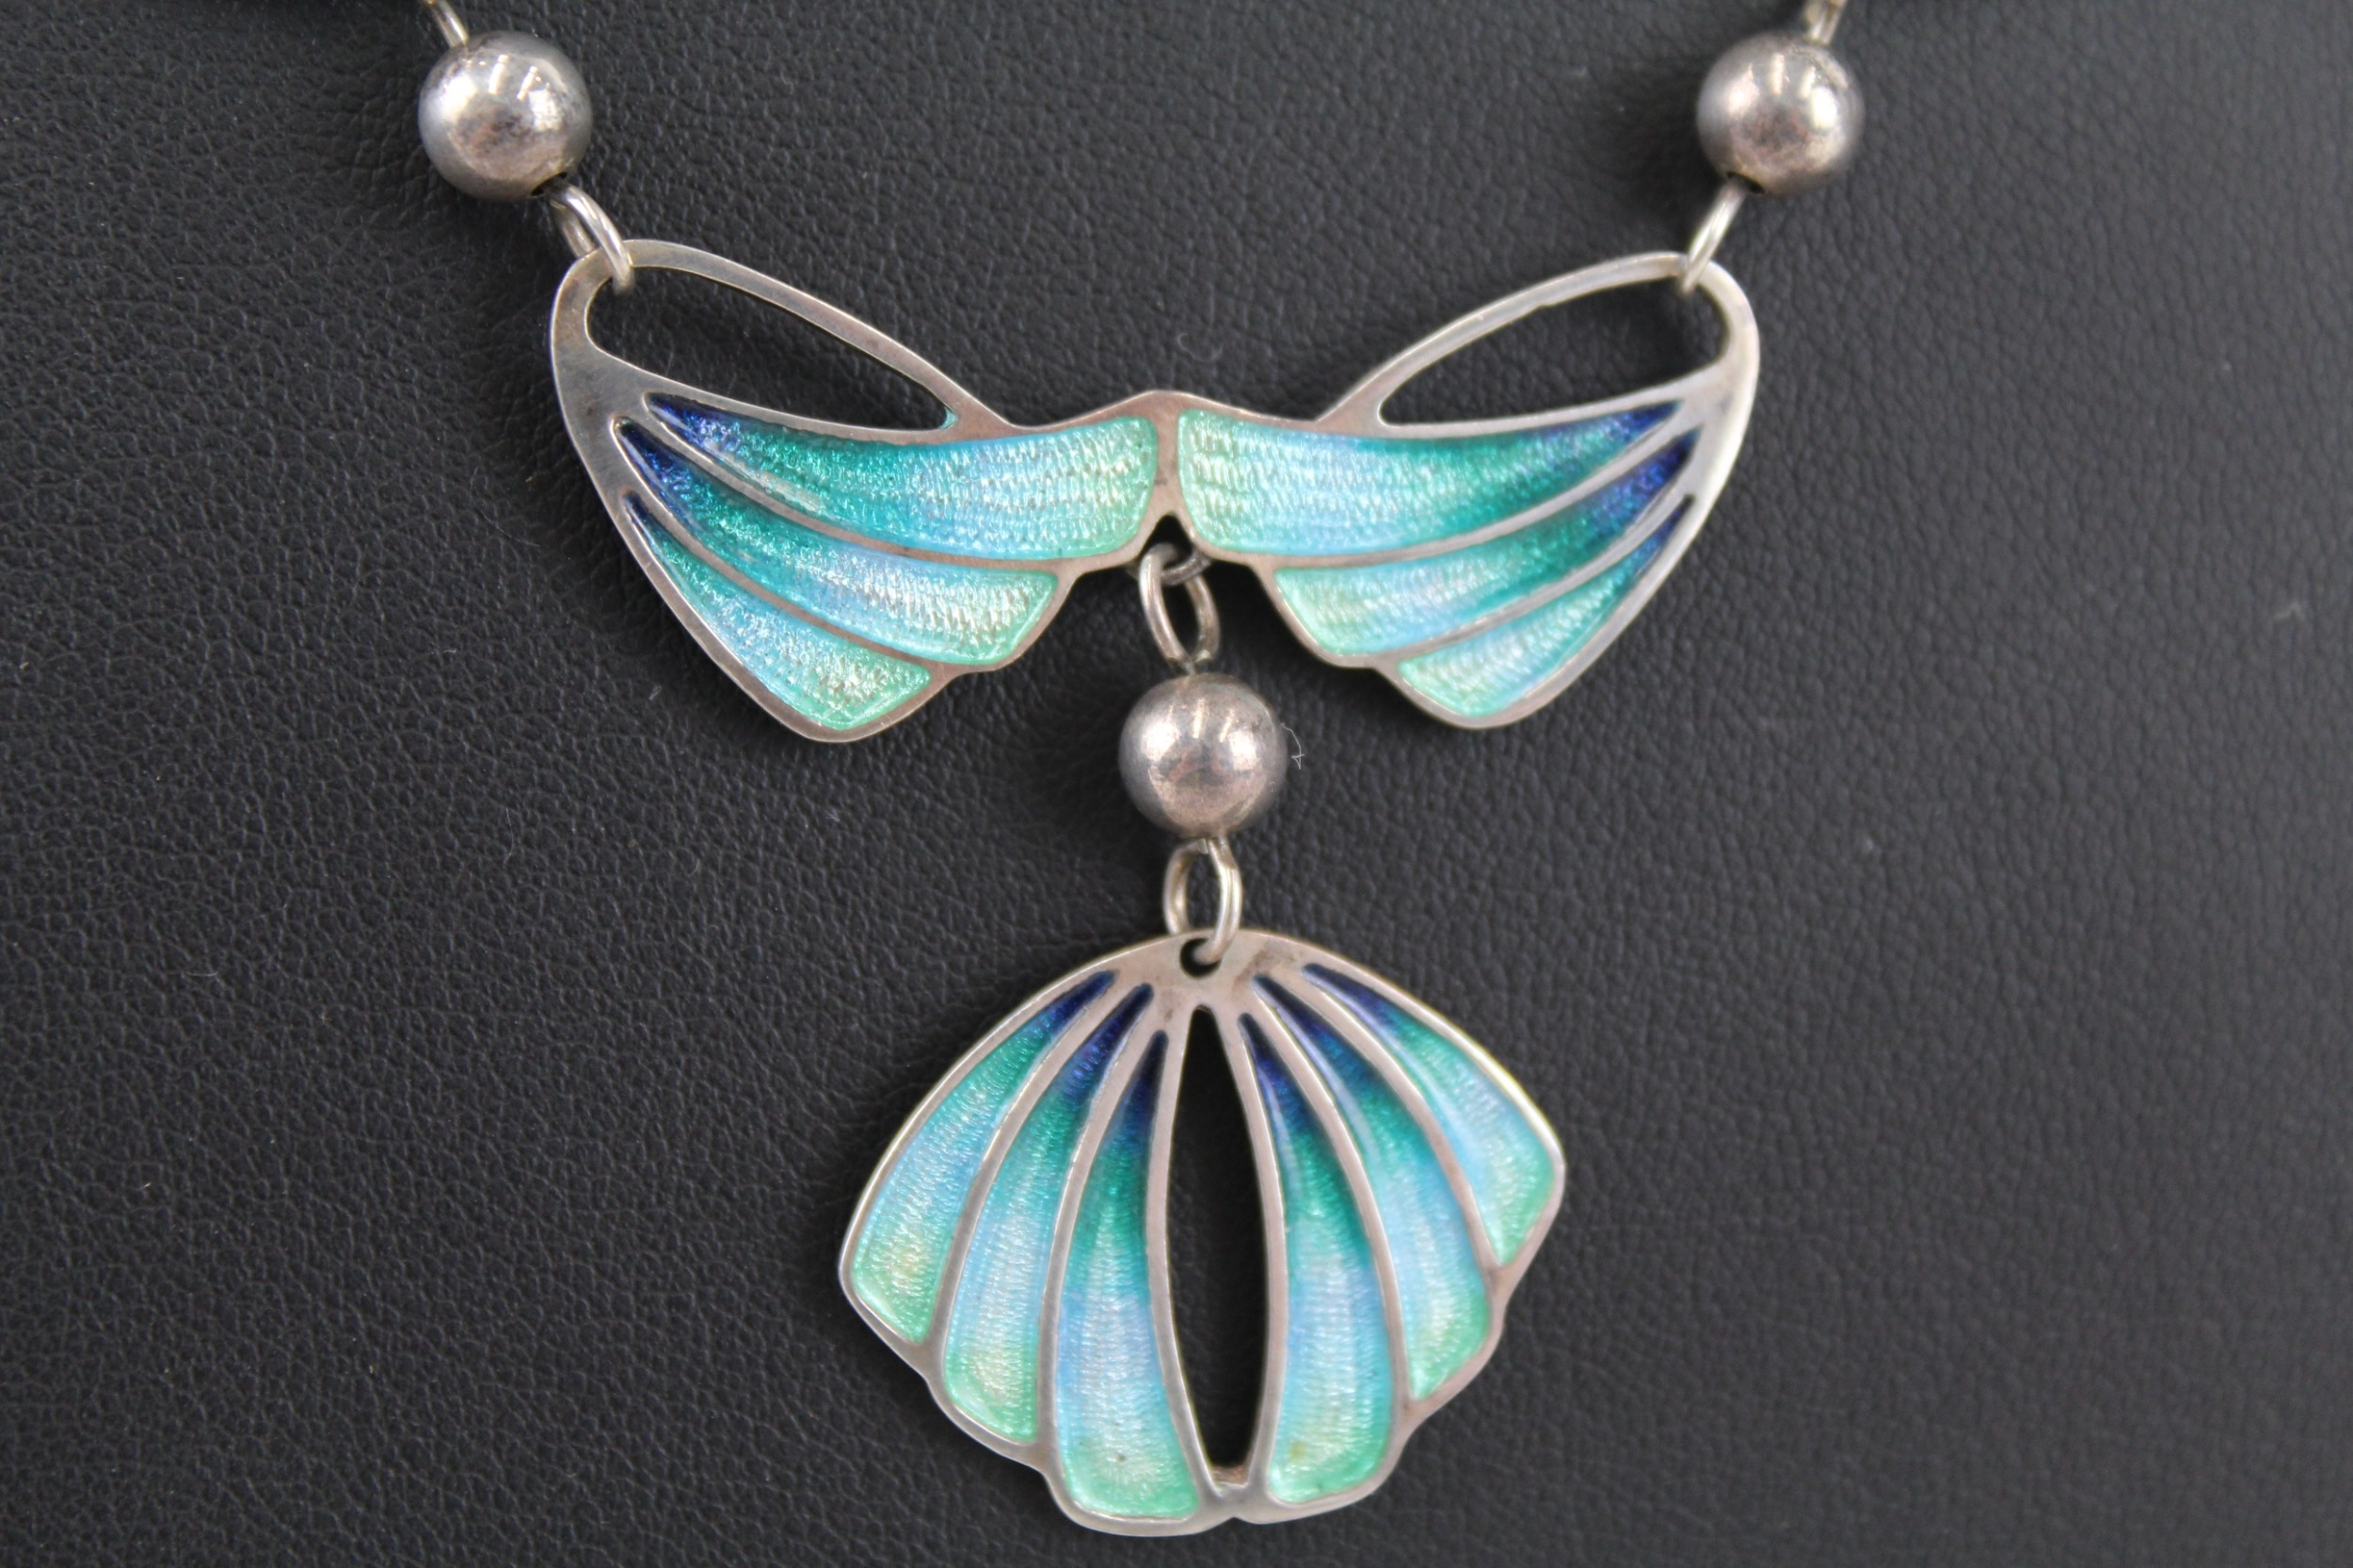 A silver Art Nouveau style enamel necklace and earring set by Malcom Gray (24g) - Image 3 of 6